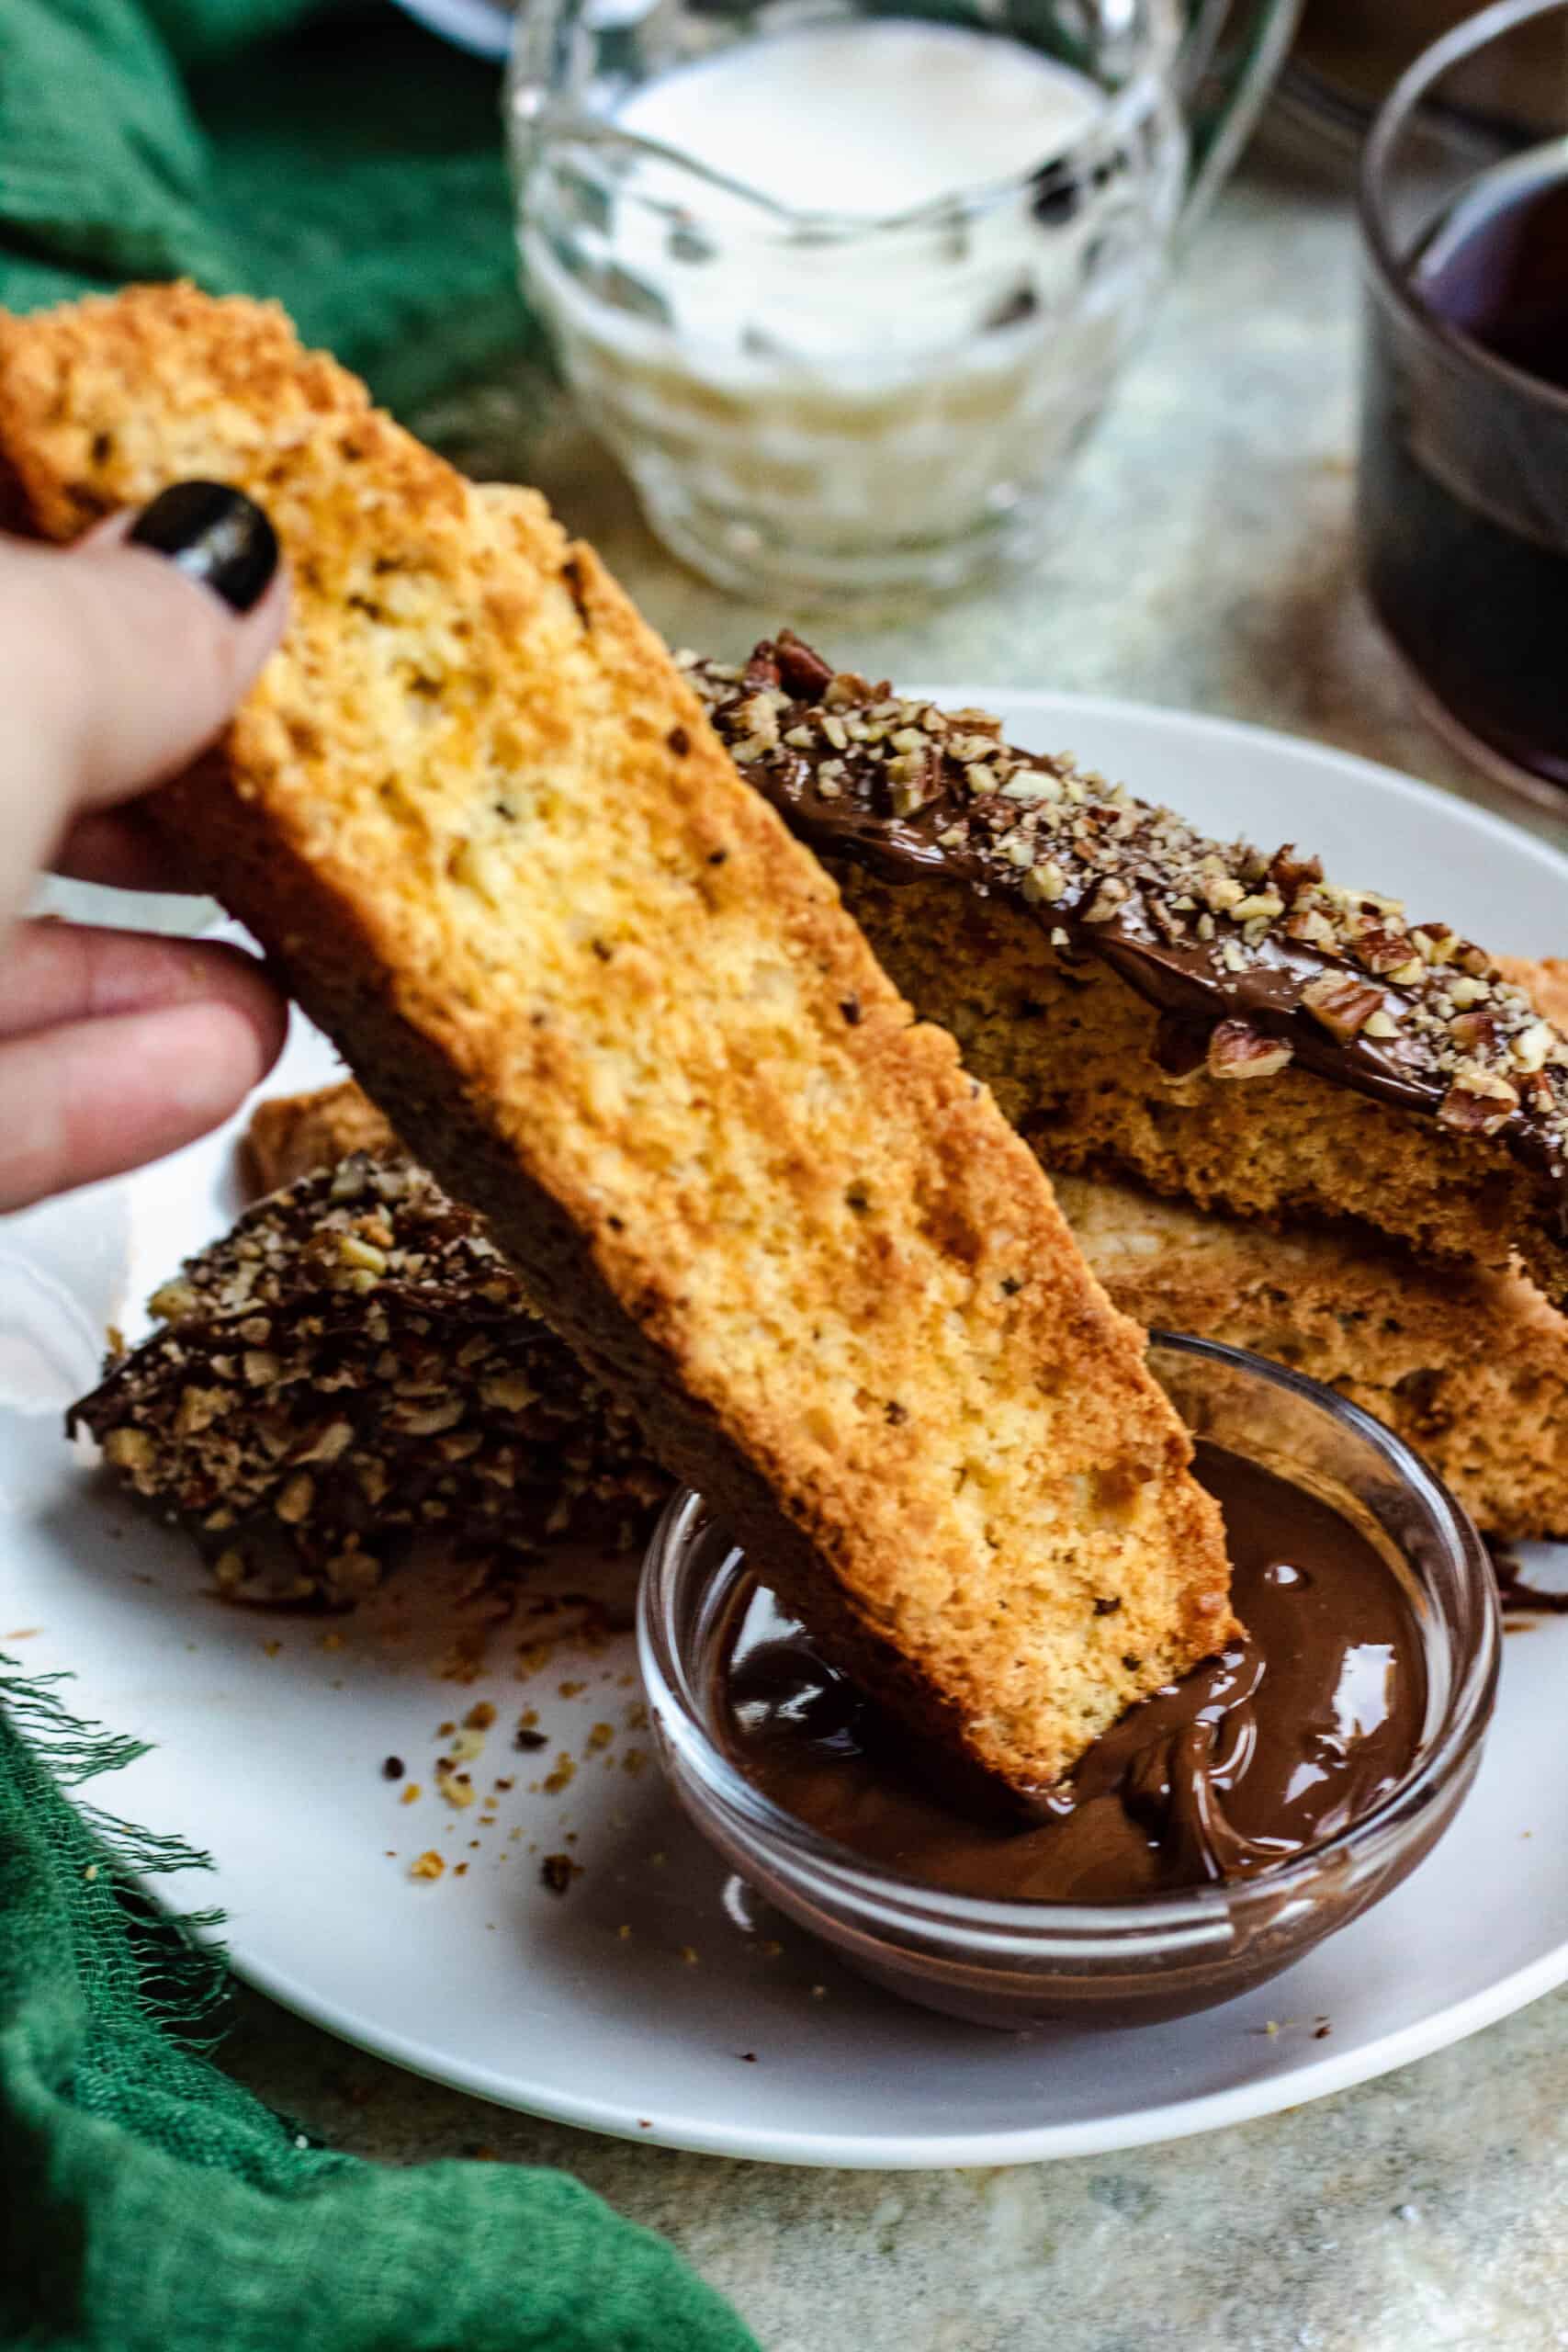 Plate of biscotti with a small bowl of chocolate sauce with a hand dunking a biscotti into it.